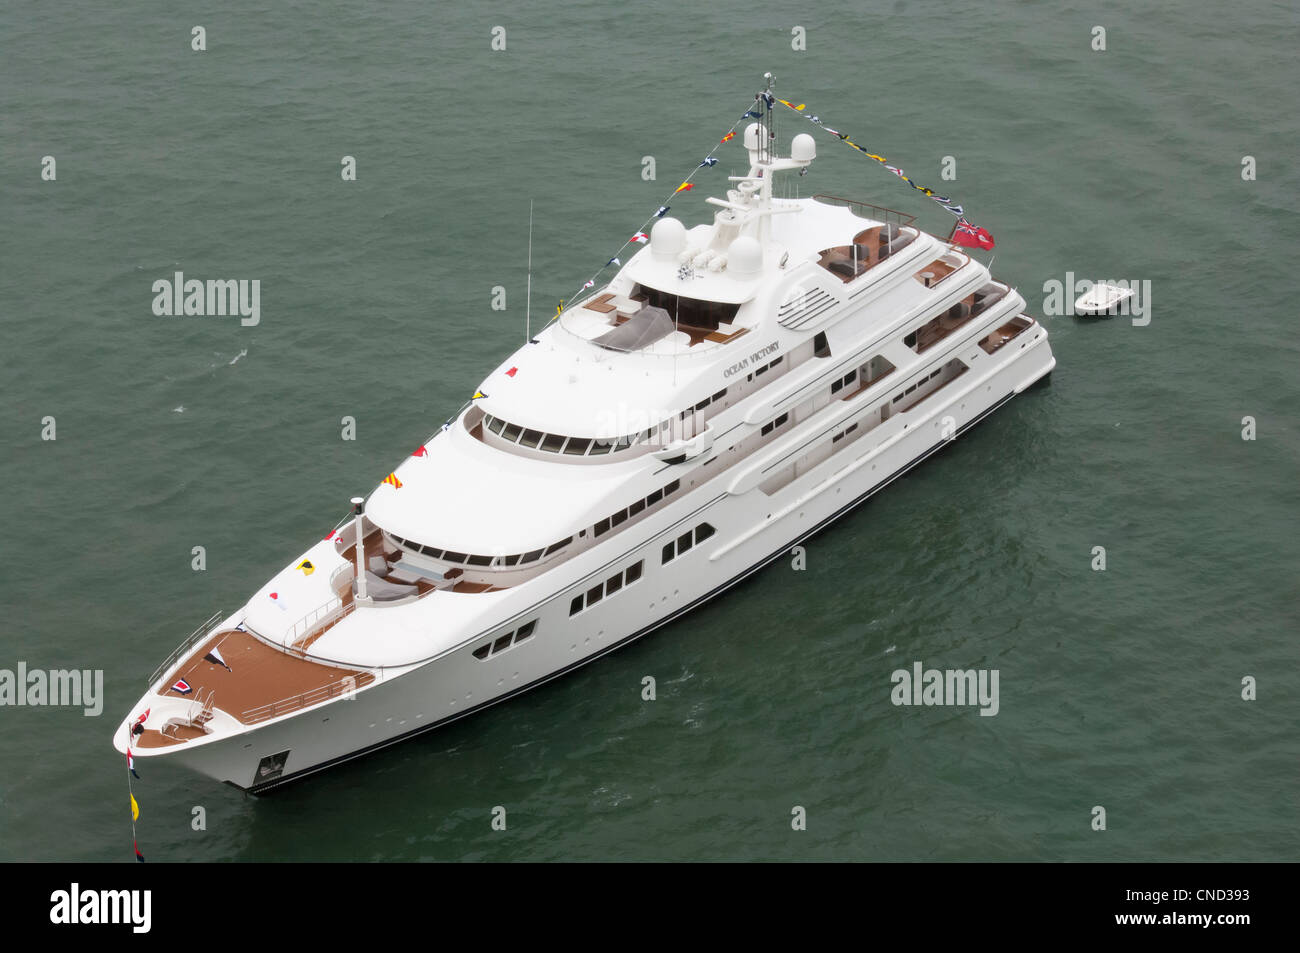 76 Metre Motor yacht Ocean Victory at Anchor seen from the air Stock Photo